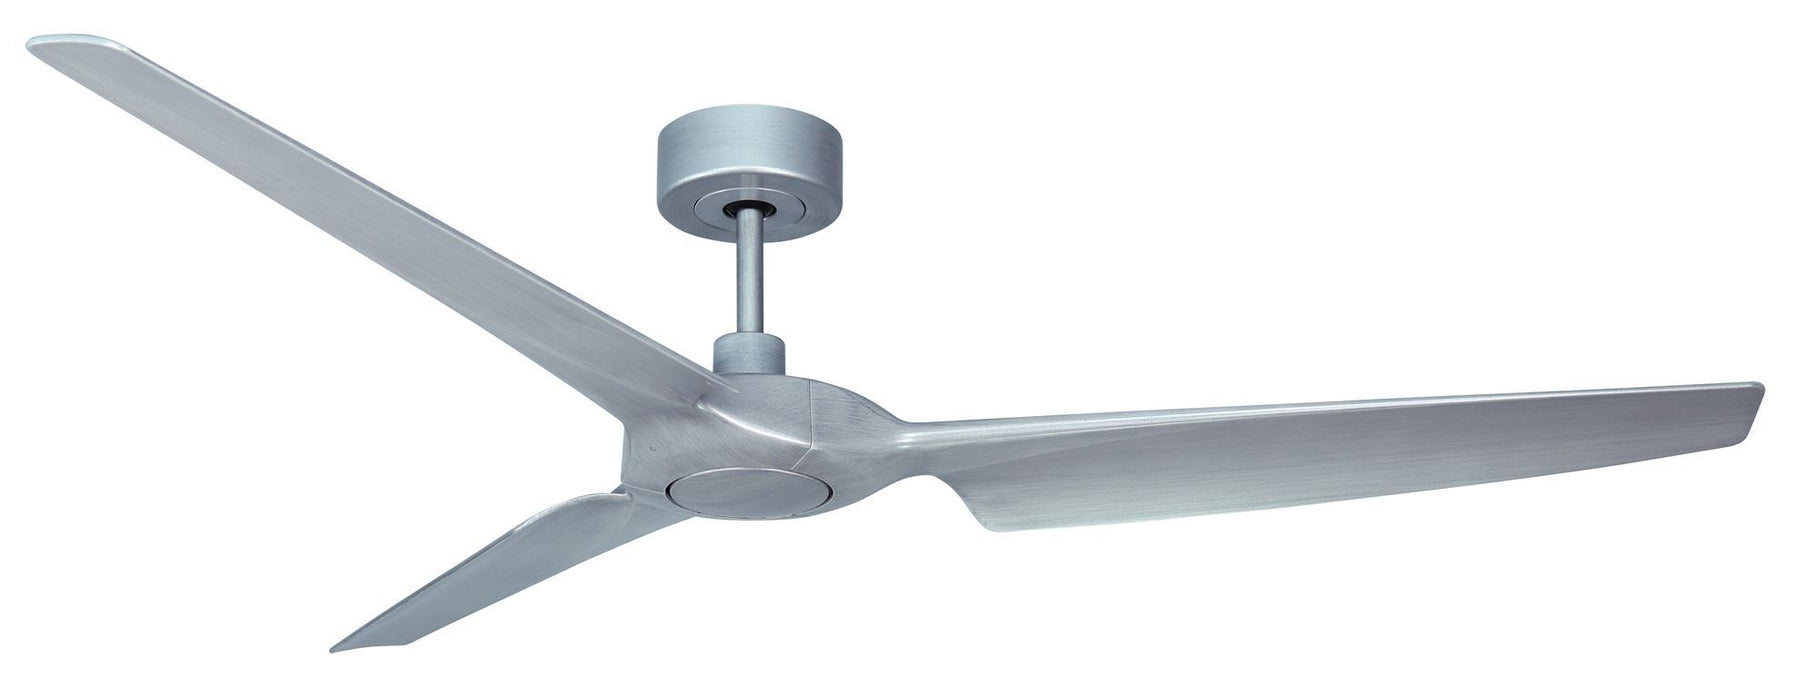 60 inch Astra Ceiling Fan by TroposAir - Brushed Nickel